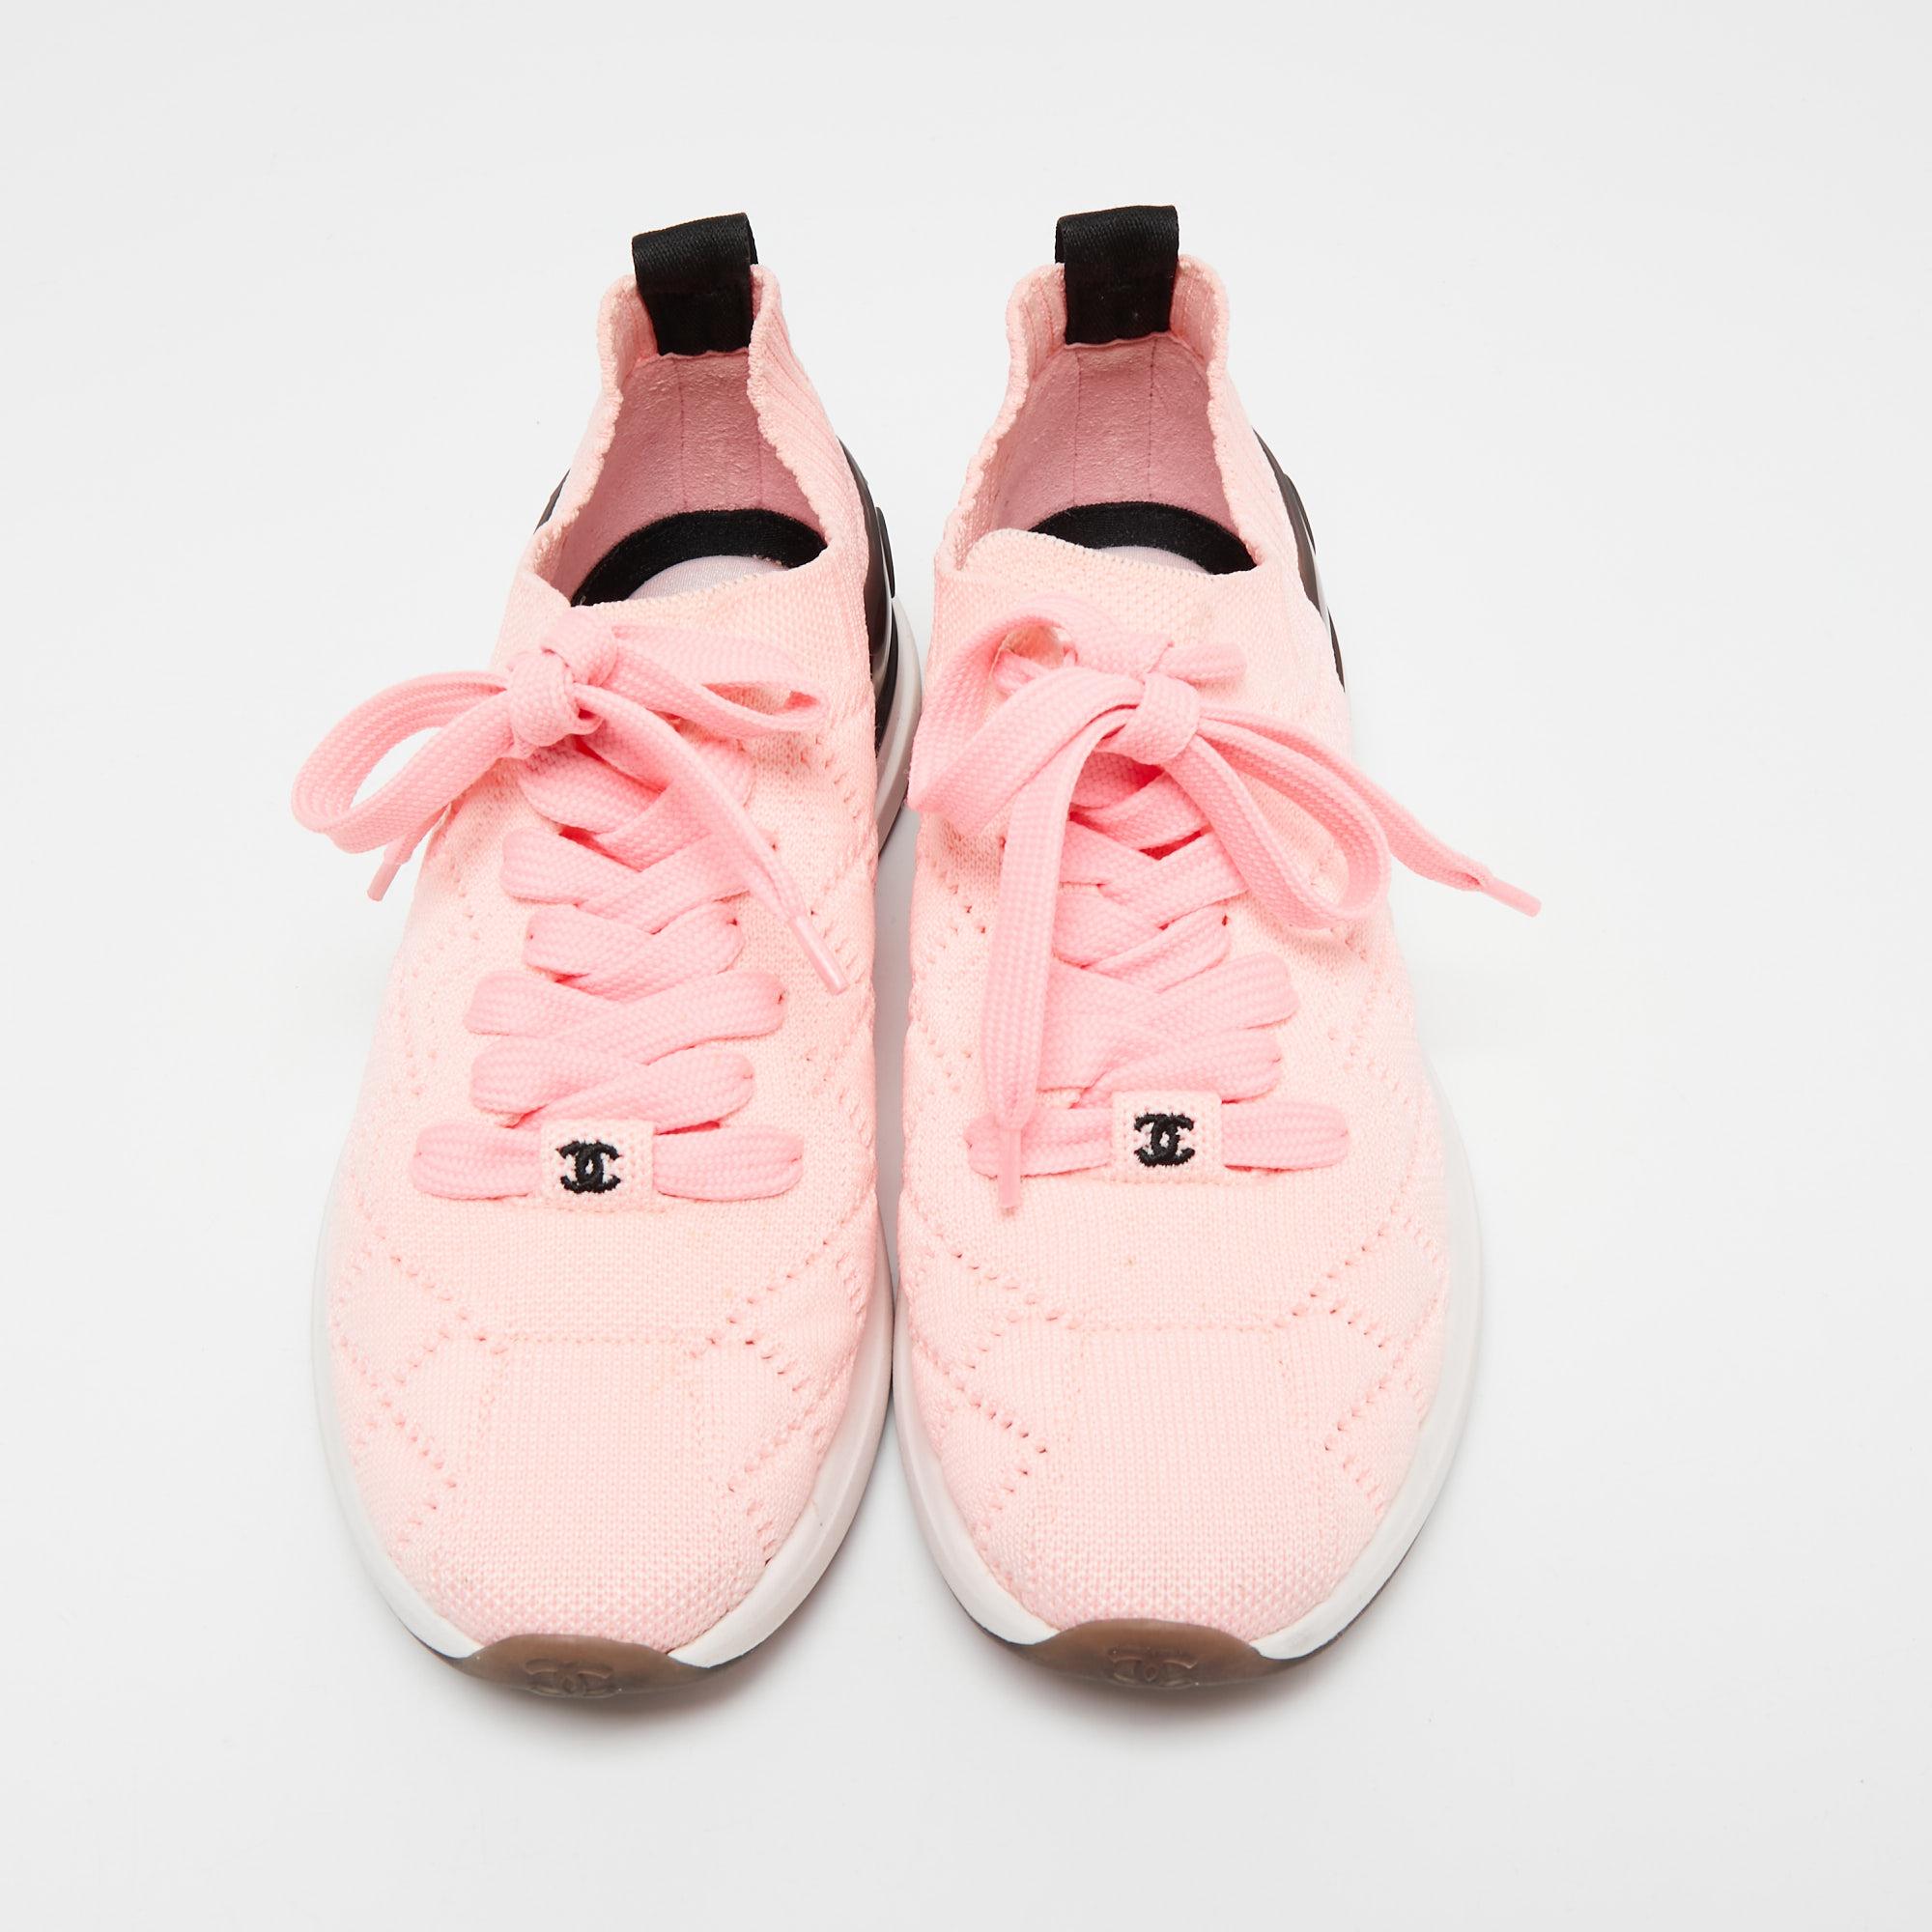 A desirable creation in light pink, these Chanel sneakers will keep on top of the trends. They are created from knit fabrics with a brand signature on the lace-up vamps, pull tabs at the counters, and rubber soles.

Includes: Original Dustbag

